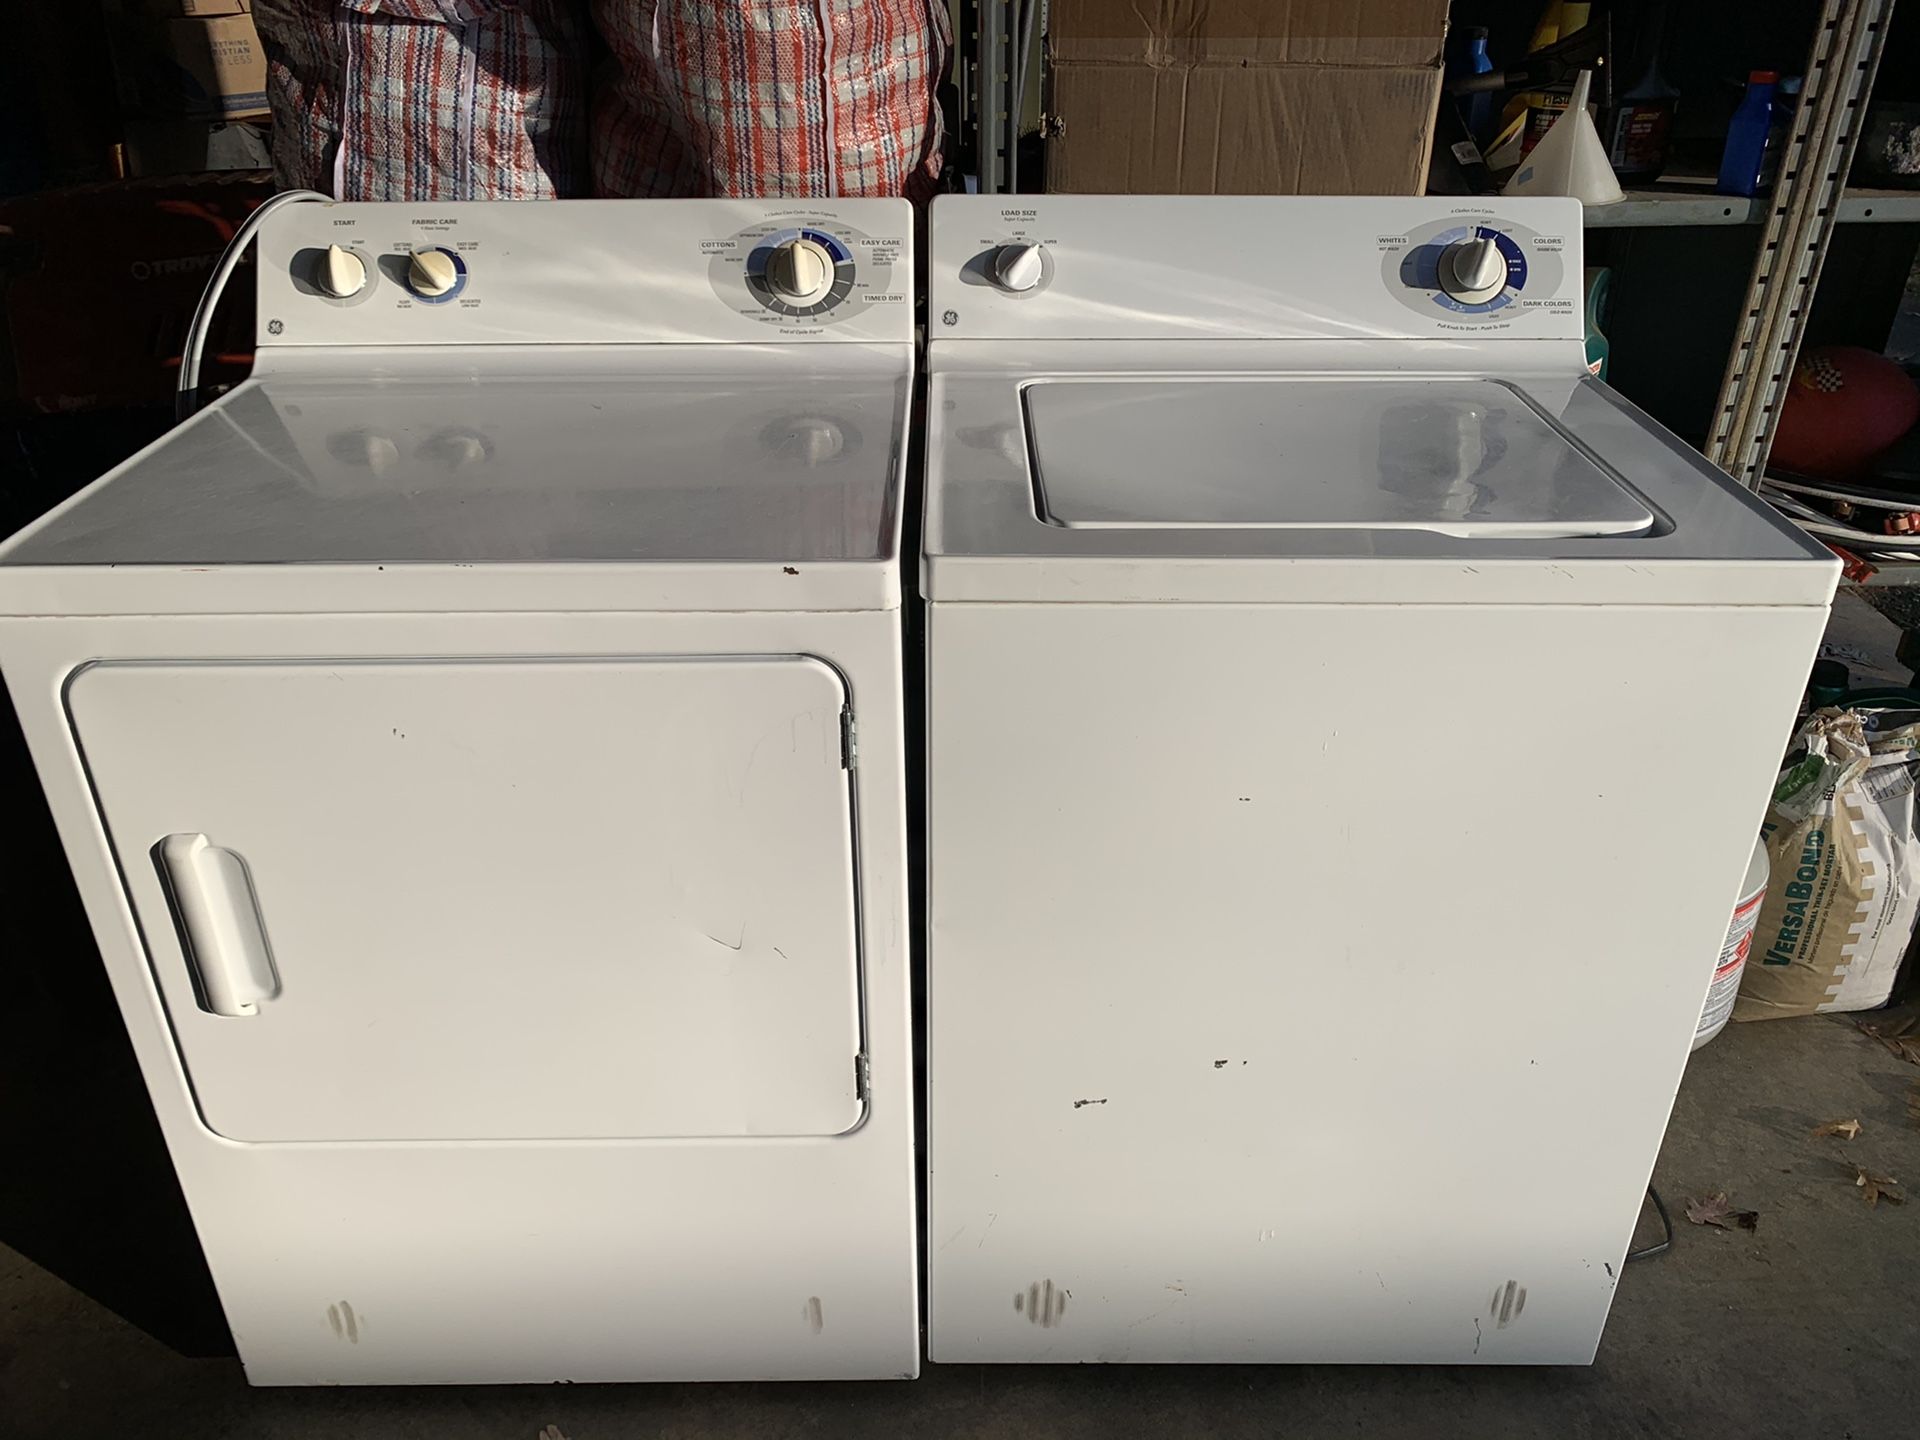 General Electric Washer and Dryer